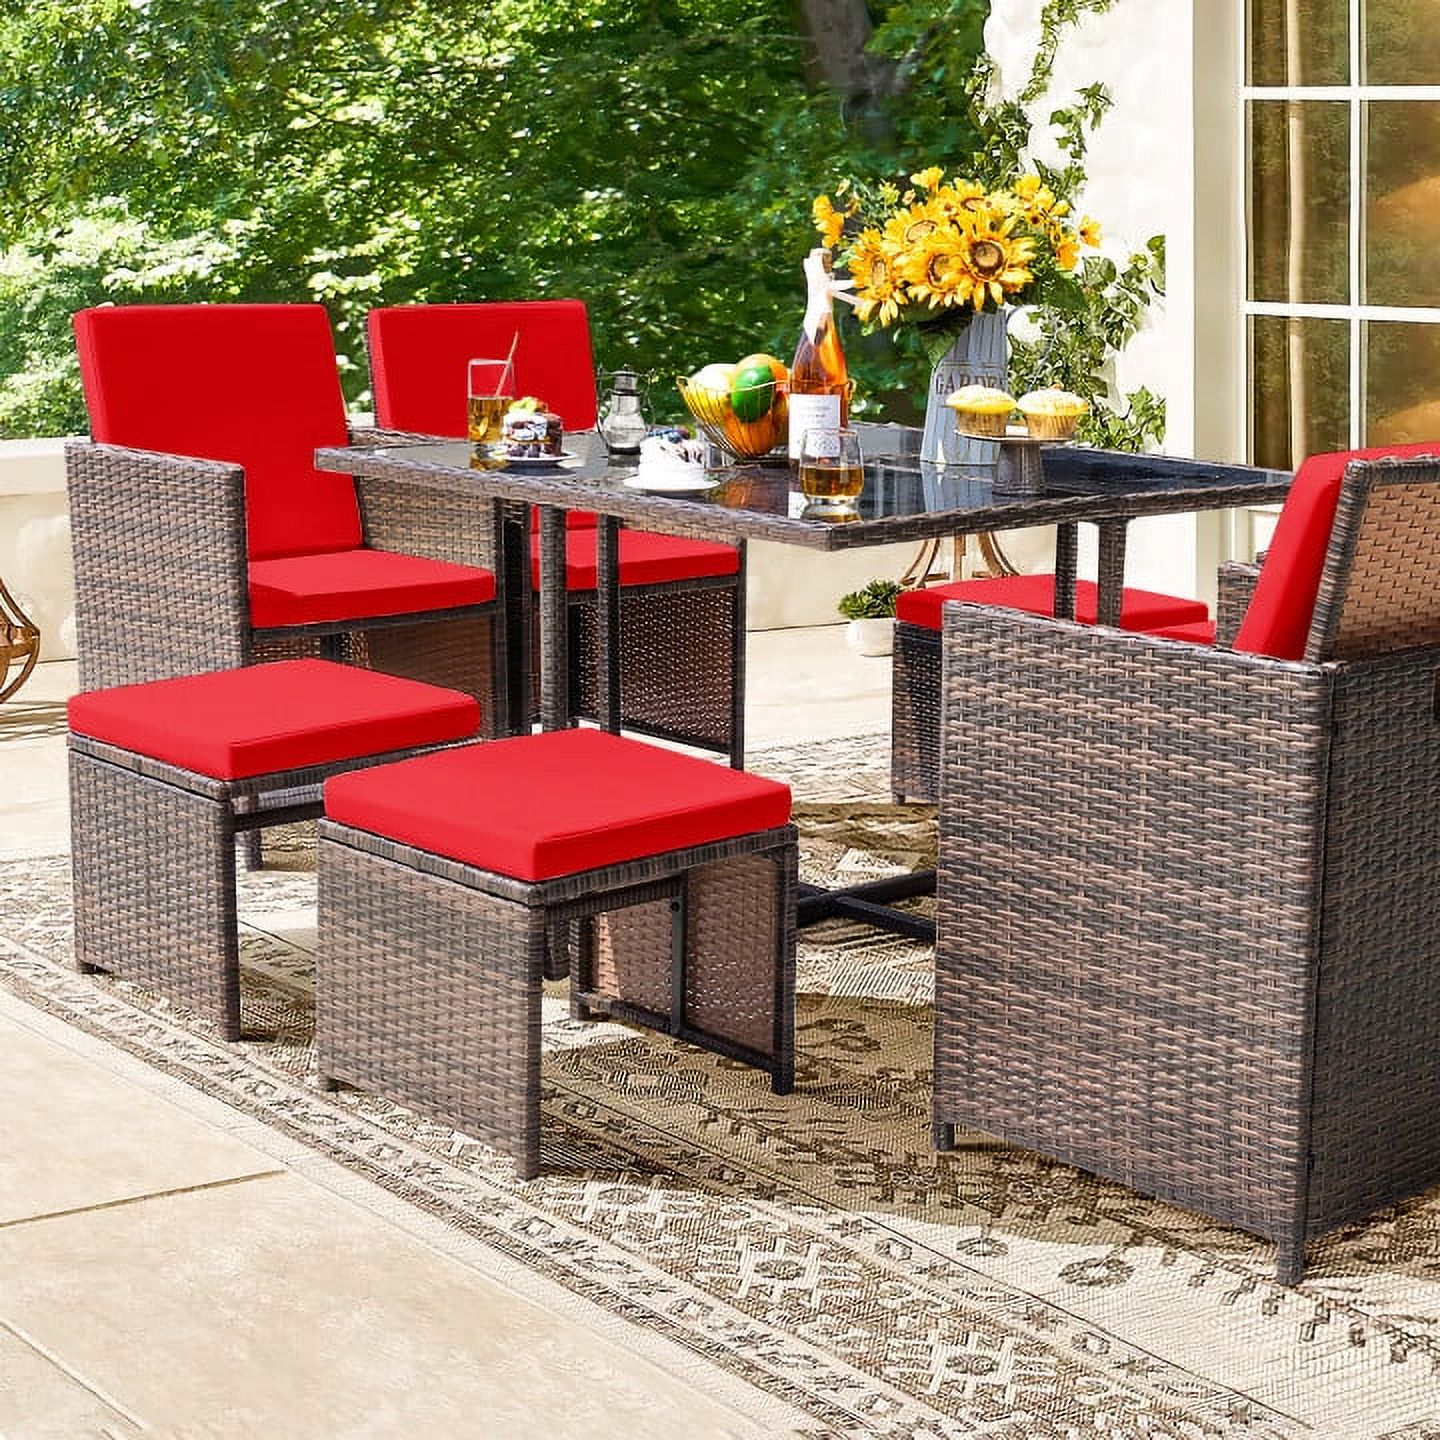 Lacoo 9 Pieces Patio Dining Sets Outdoor Indoor Furniture Patio Wicker Rattan Chairs and Tempered Glass Table Sectional Set Conversation Set Cushioned with Ottoman, Red, 8 - image 1 of 7